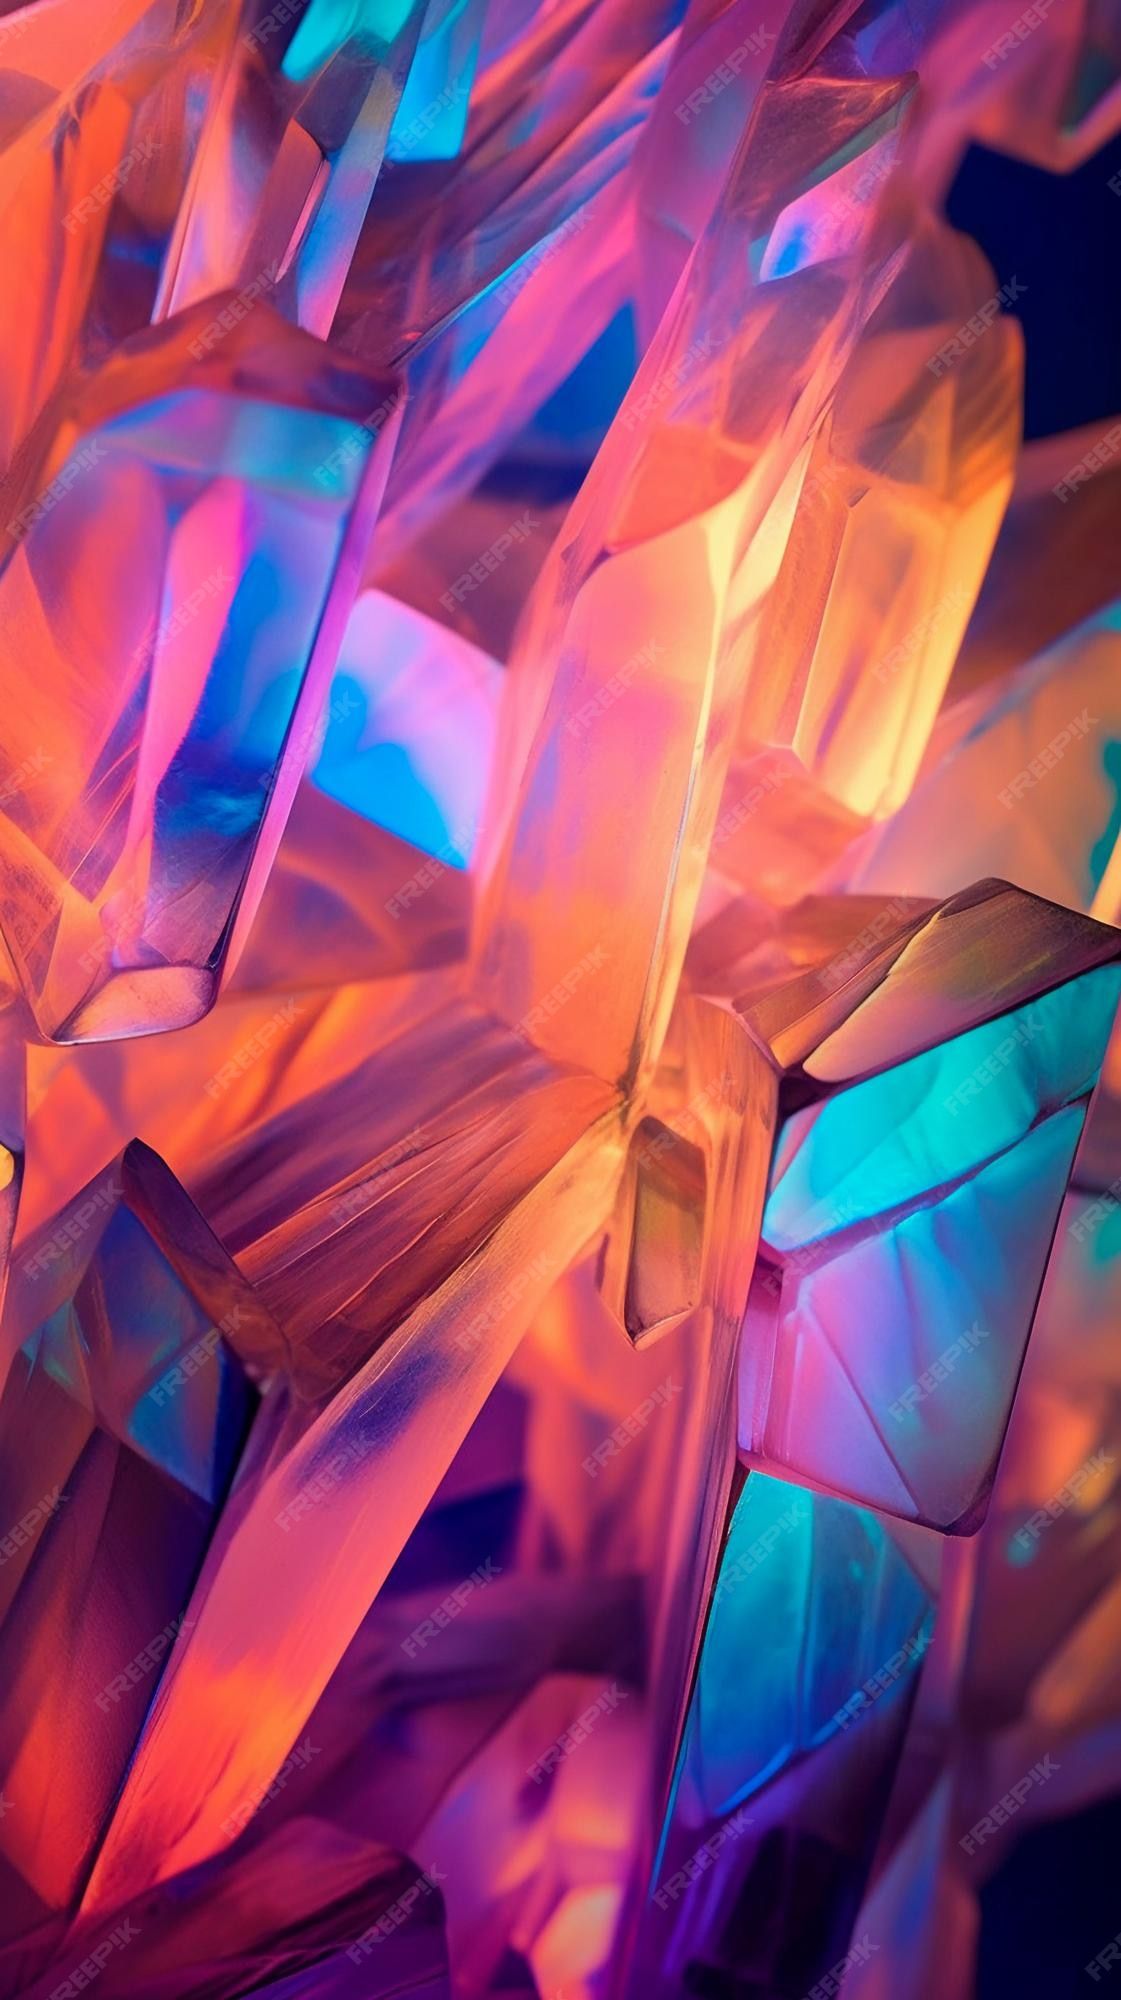 A colorful abstract background with a vibrant and artistic design. - Iridescent